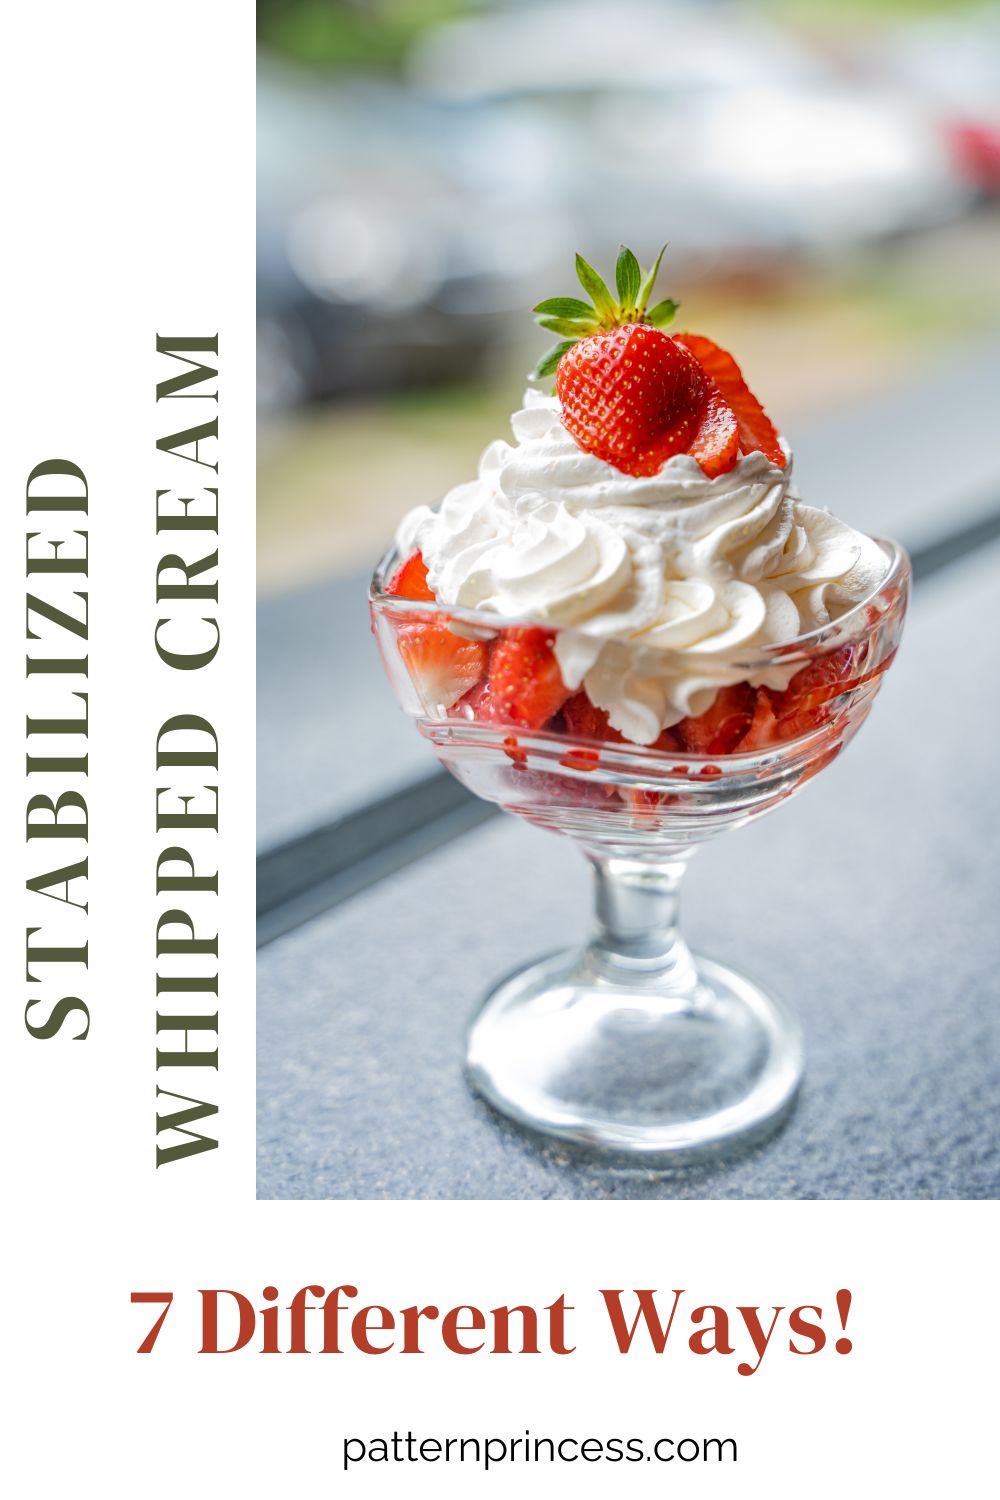 How to Make Sweet Stabilized Whipped Cream 7 Ways